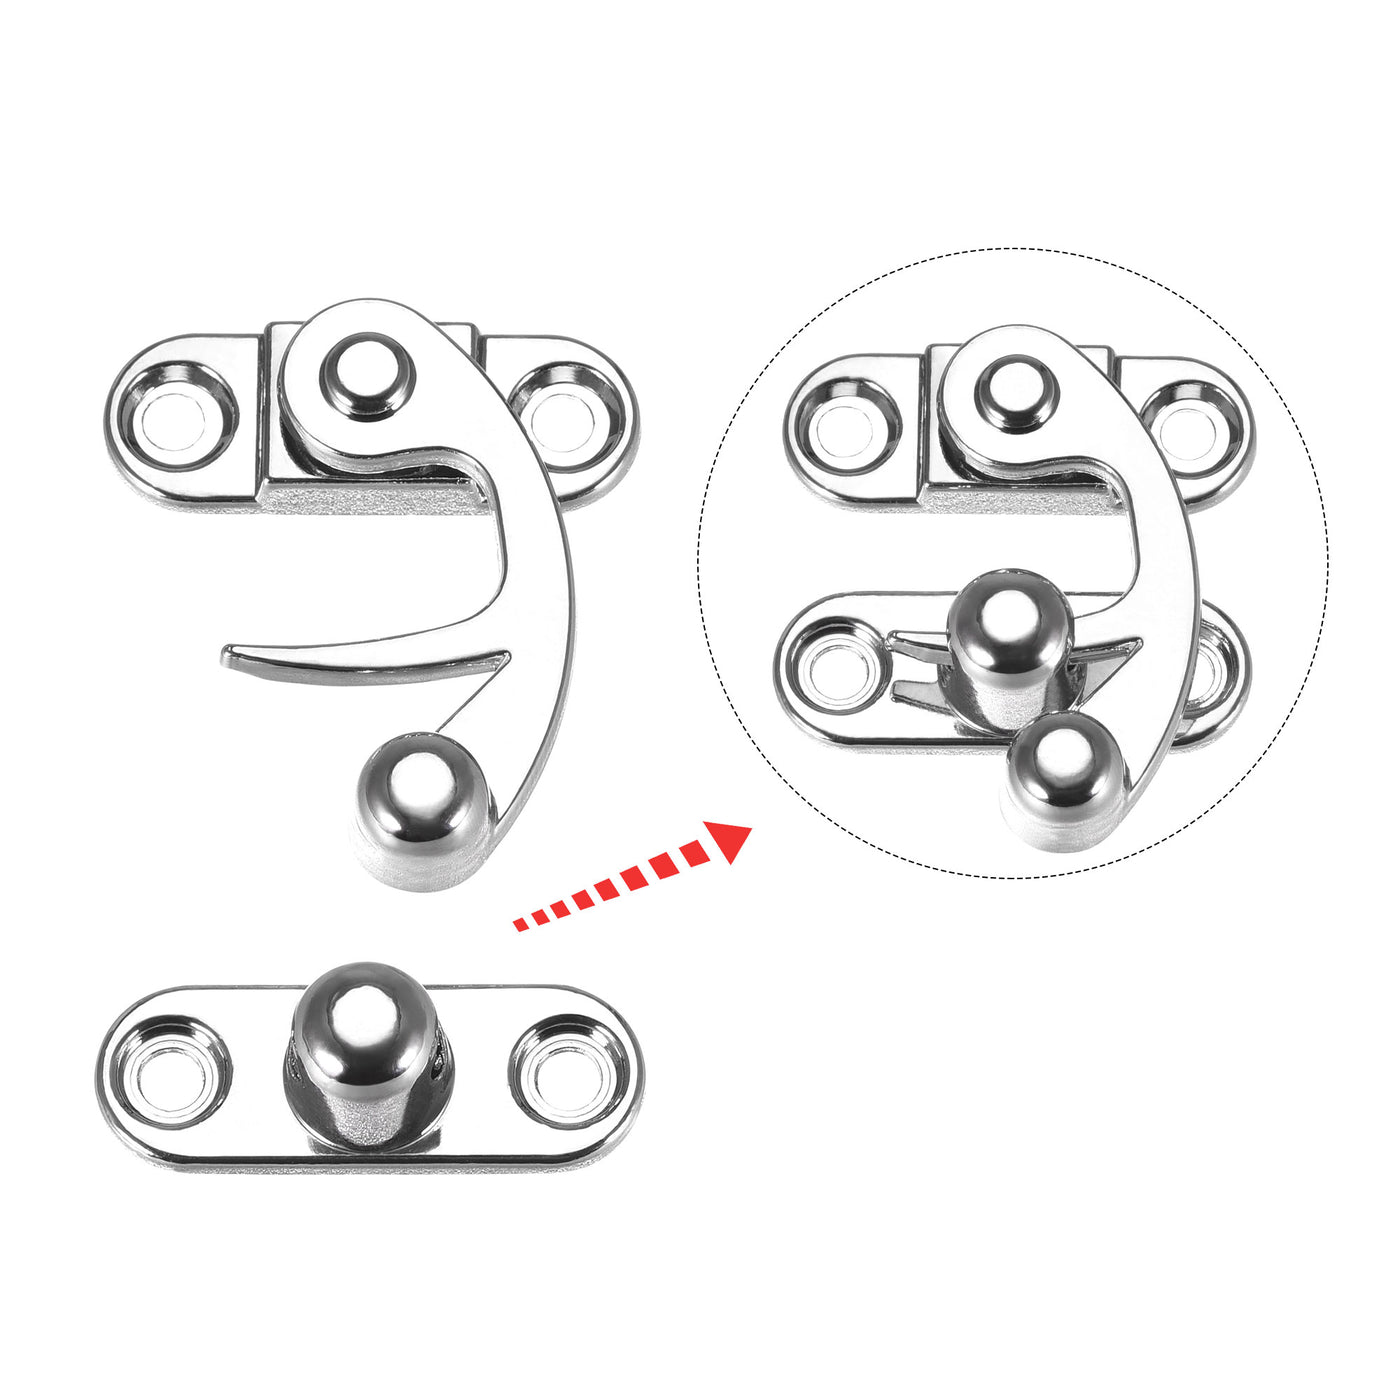 uxcell Uxcell Antique Vintage Lock Clasp Right Latch Hook Hasp 32mmx28mm Swing Arm Latch Silver Tone 10 Pcs